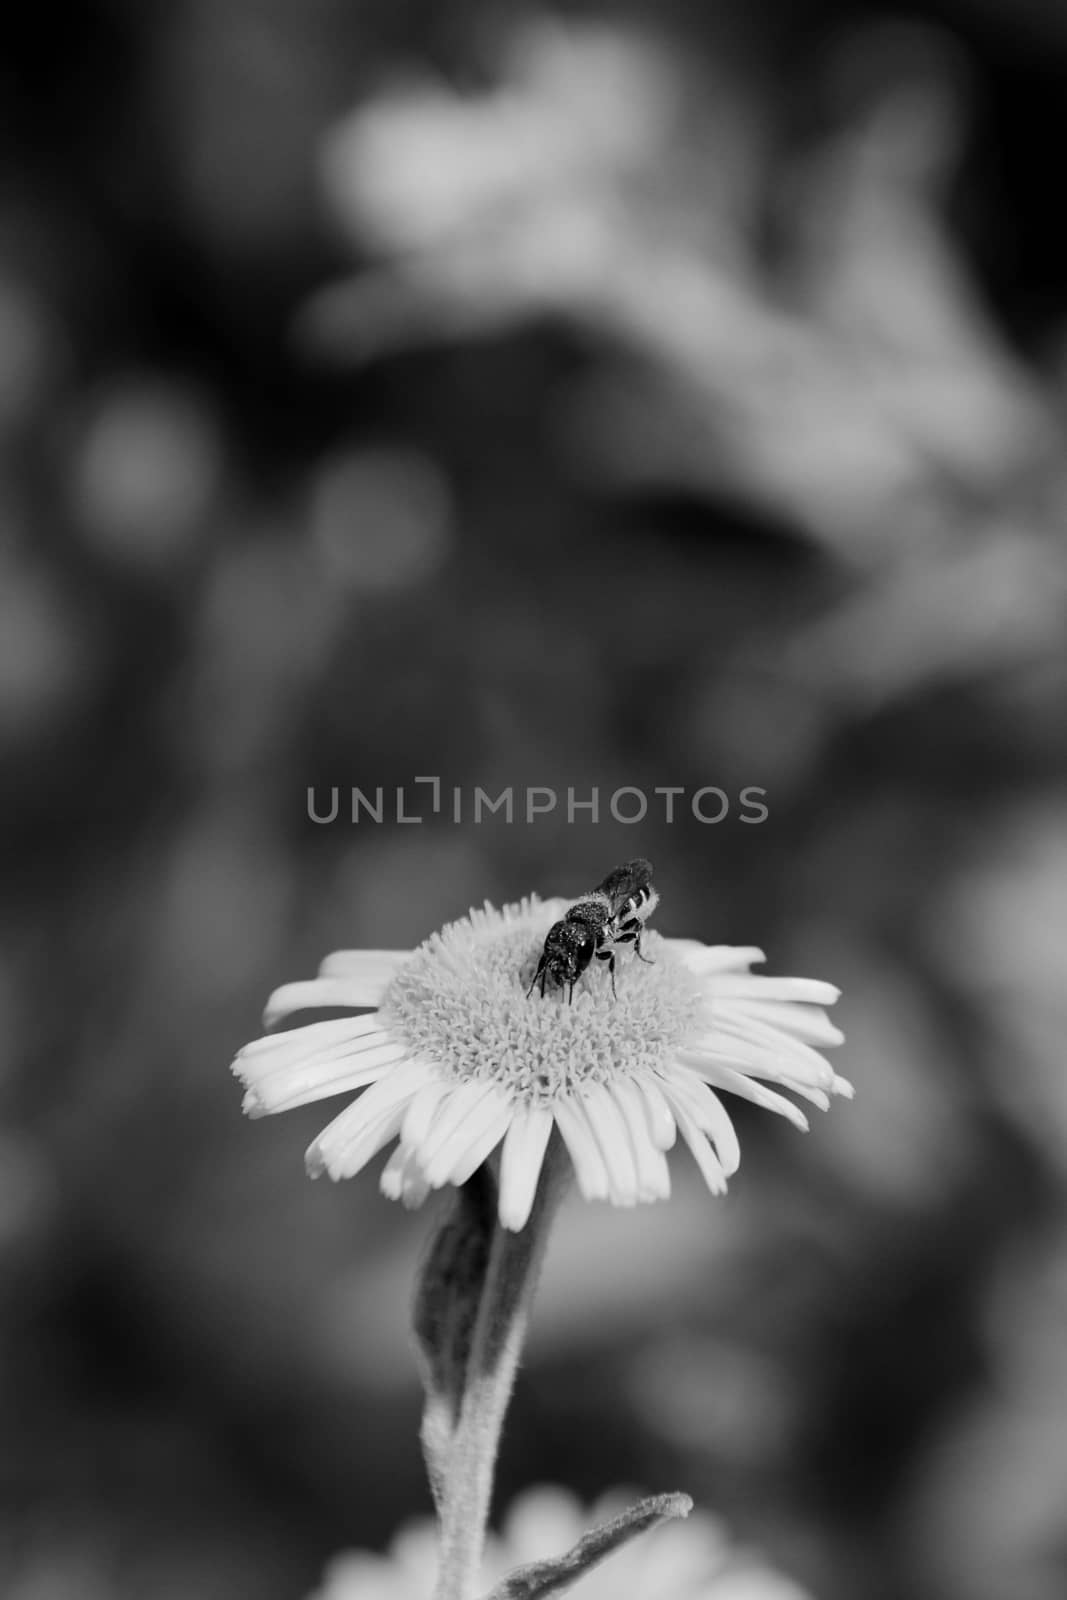 Small heriades truncorum bee taking nectar from a common fleabane flower against a background